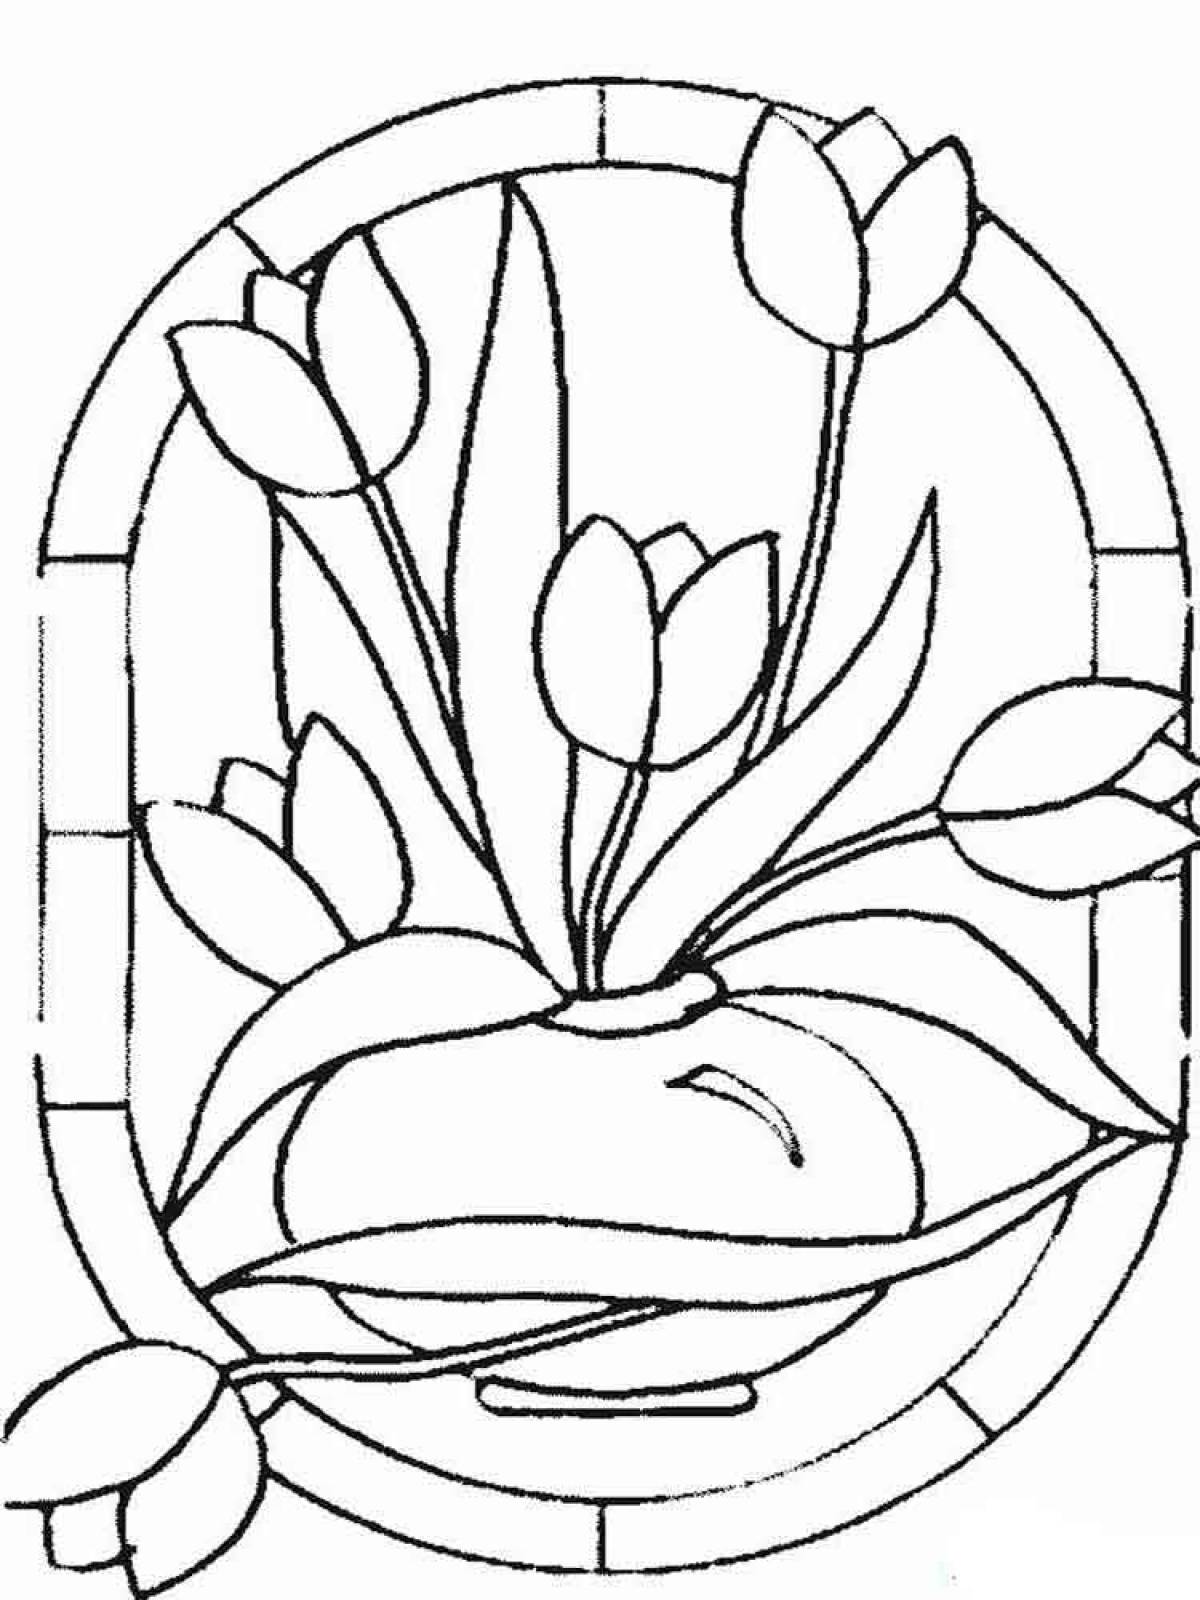 Stained glass tulips